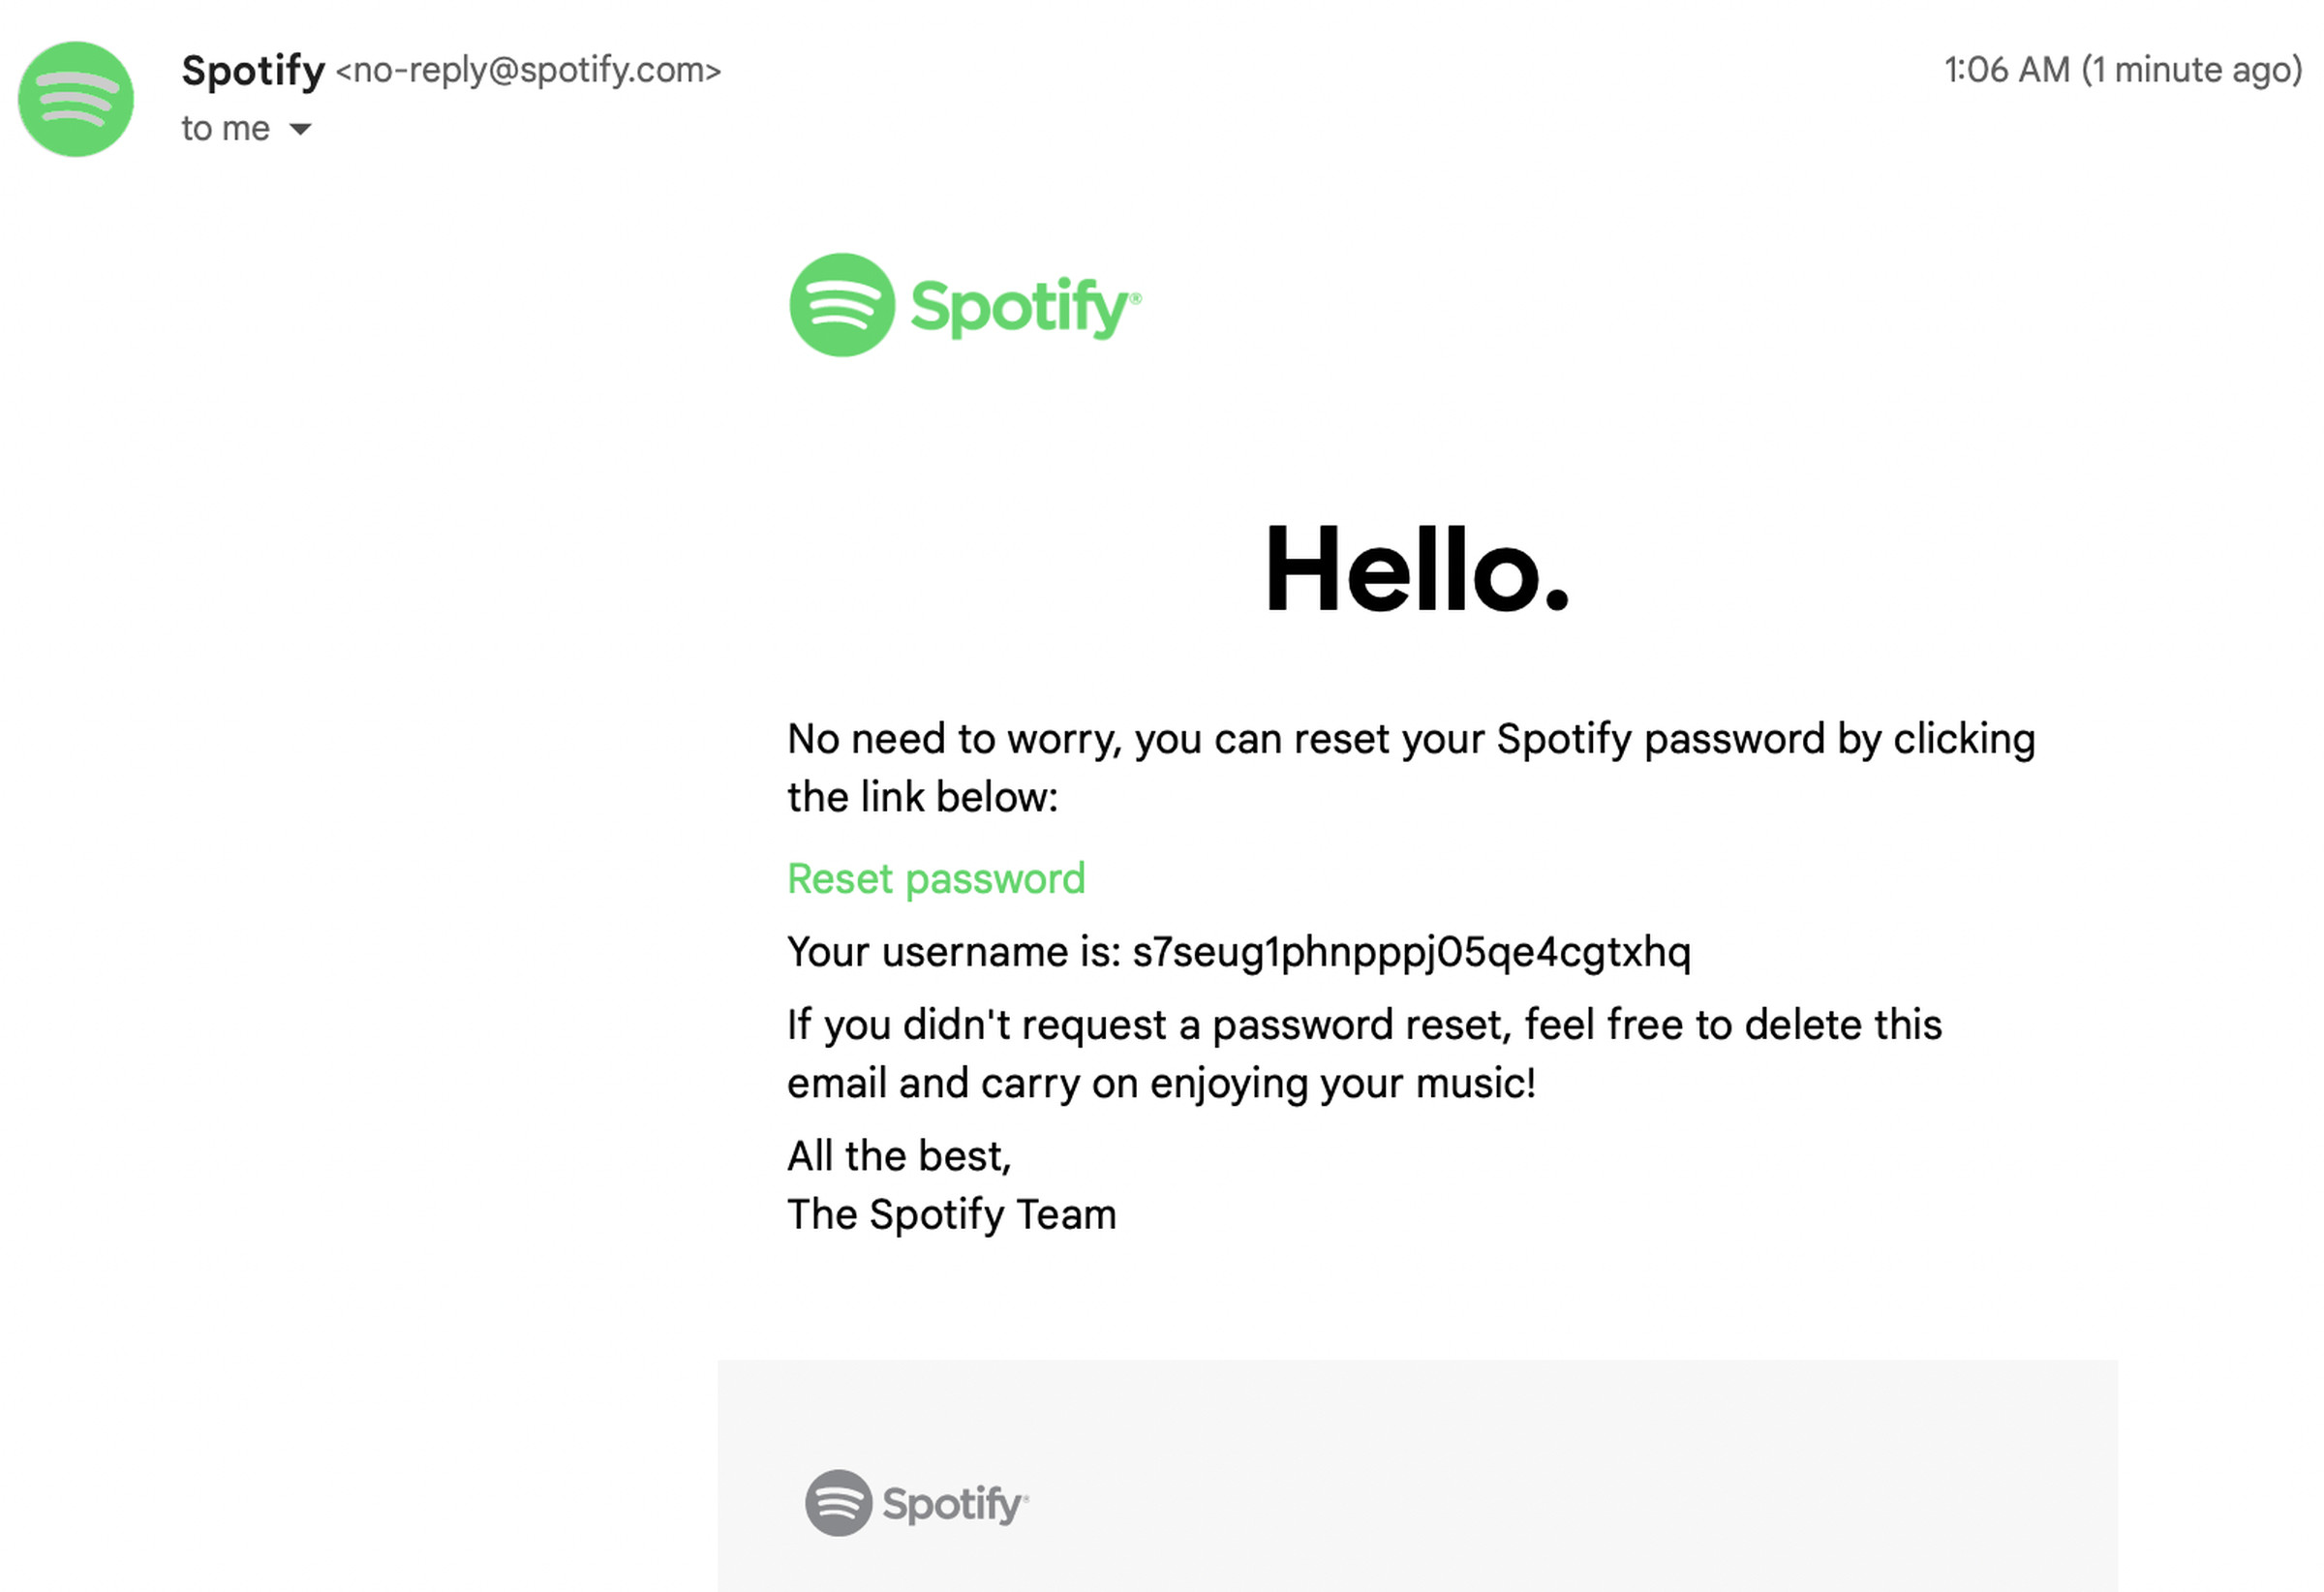 Spotify’s password reset page